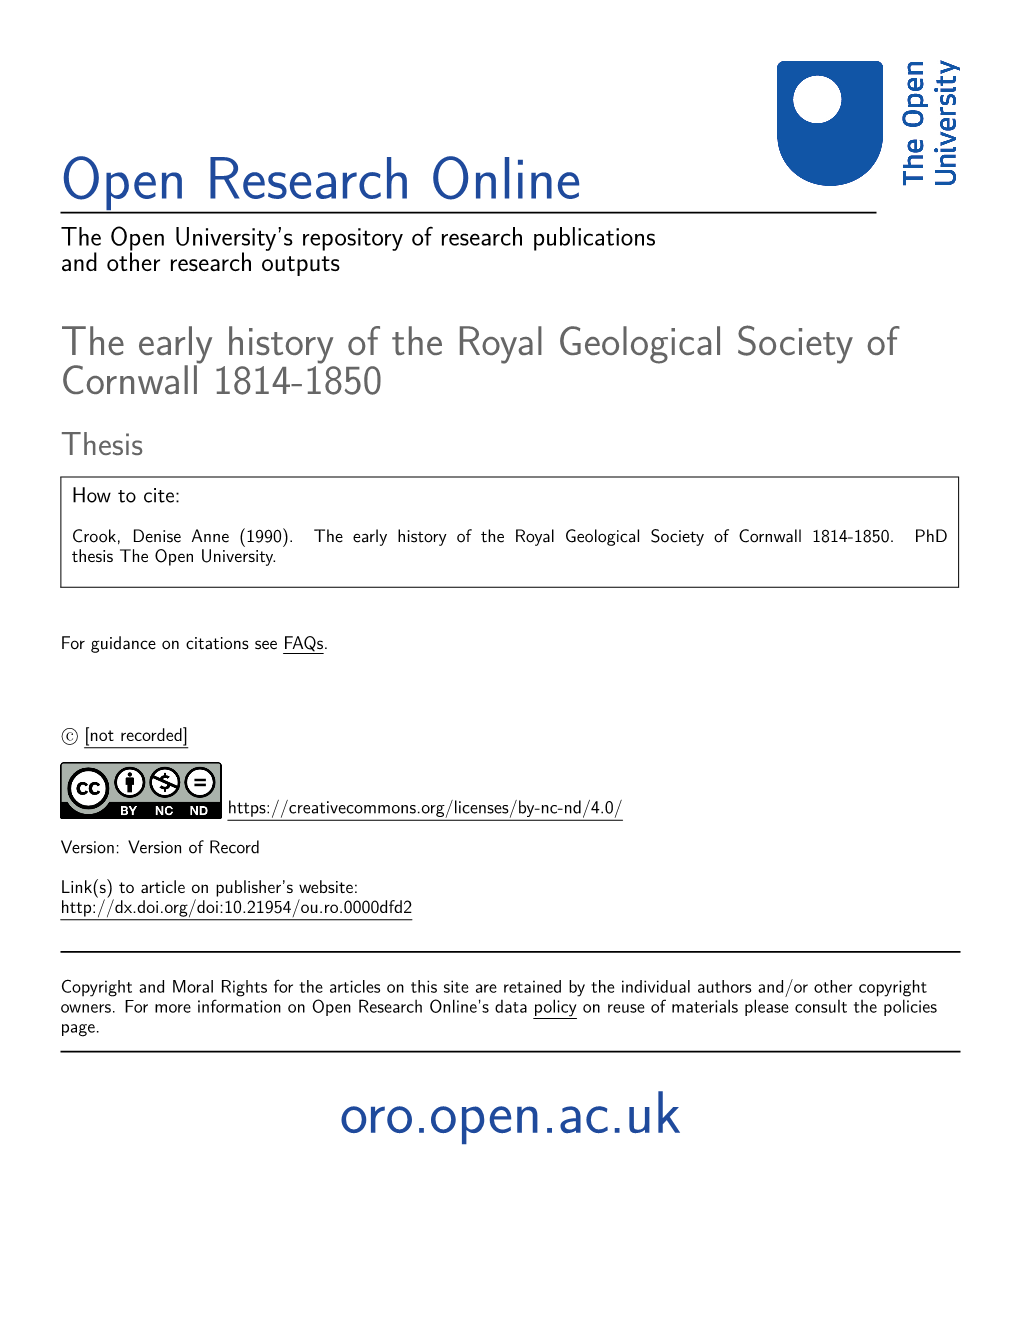 The Early History of the Royal Geological Society of Cornwall 1814-1850 Thesis